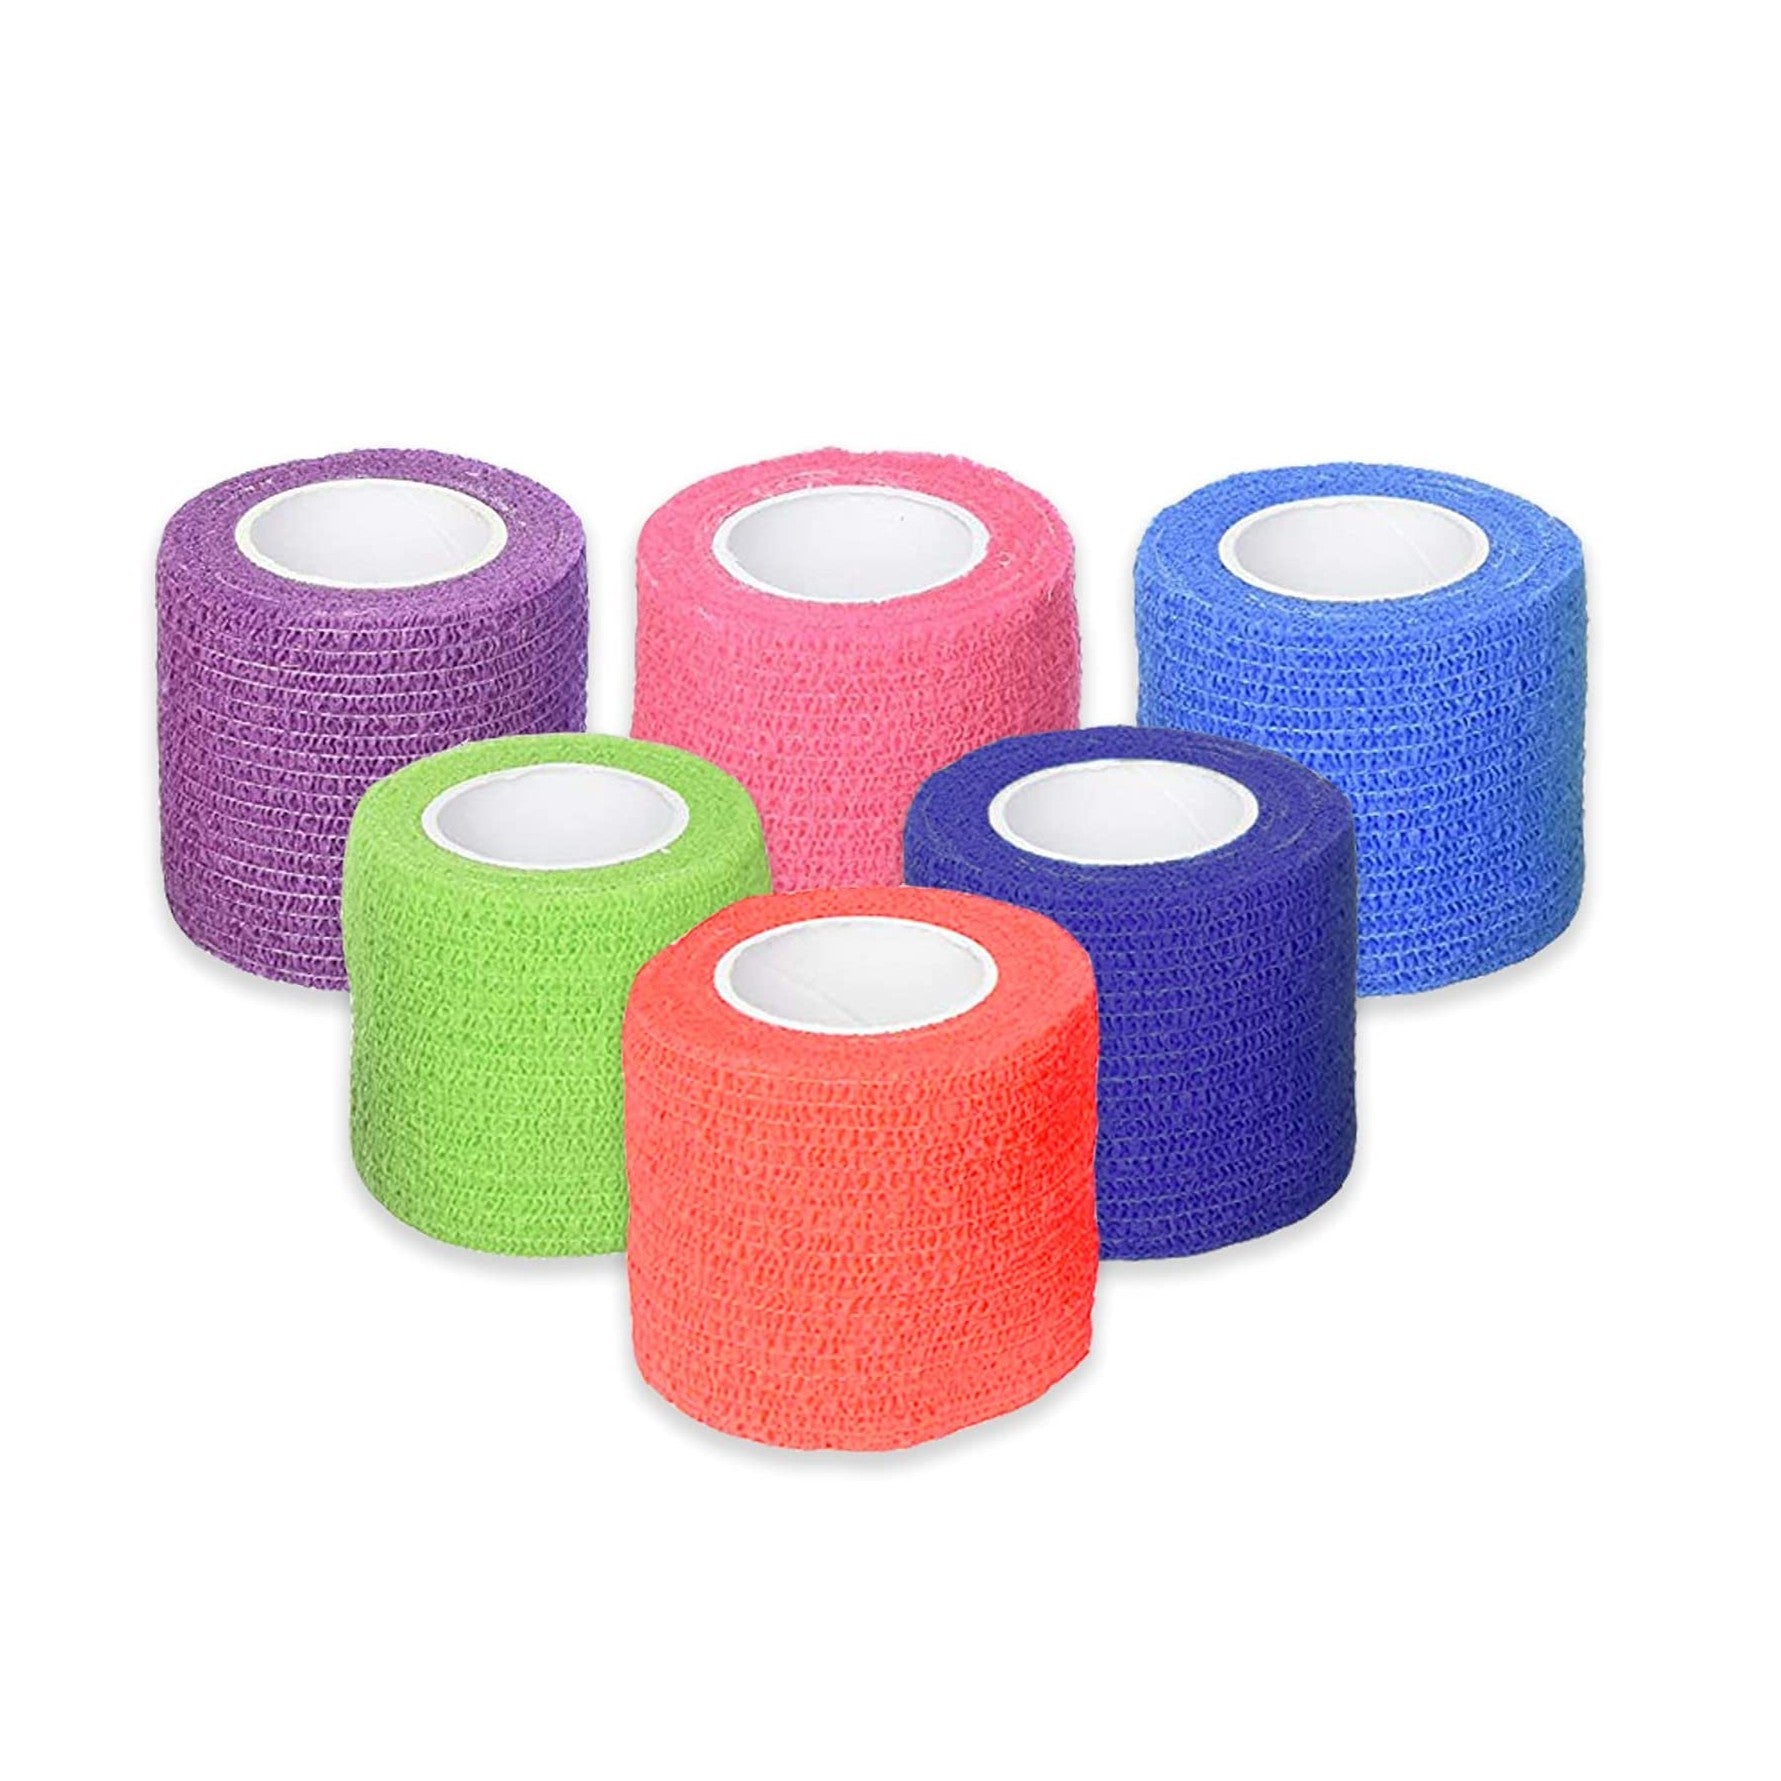 Ever Ready First Aid Self Adherent Cohesive Bandages 2" x 5 Yards - Rainbow Colors